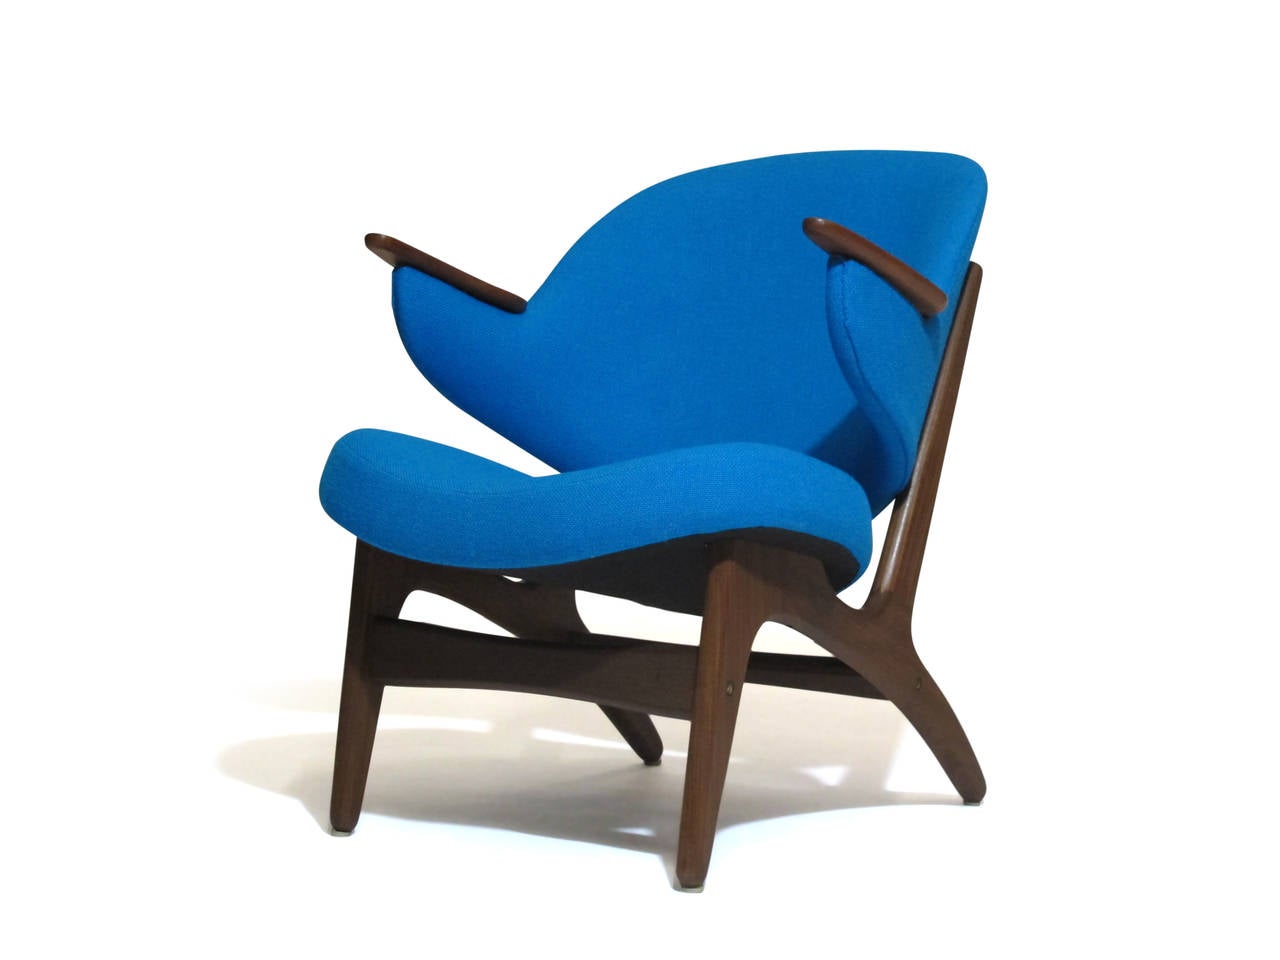 Sculptured Danish lounge chair with comfortable curved back rest on walnut frame with teak arms. Newly upholstered in an aqua blue wool textile. Fabric sample available upon request.